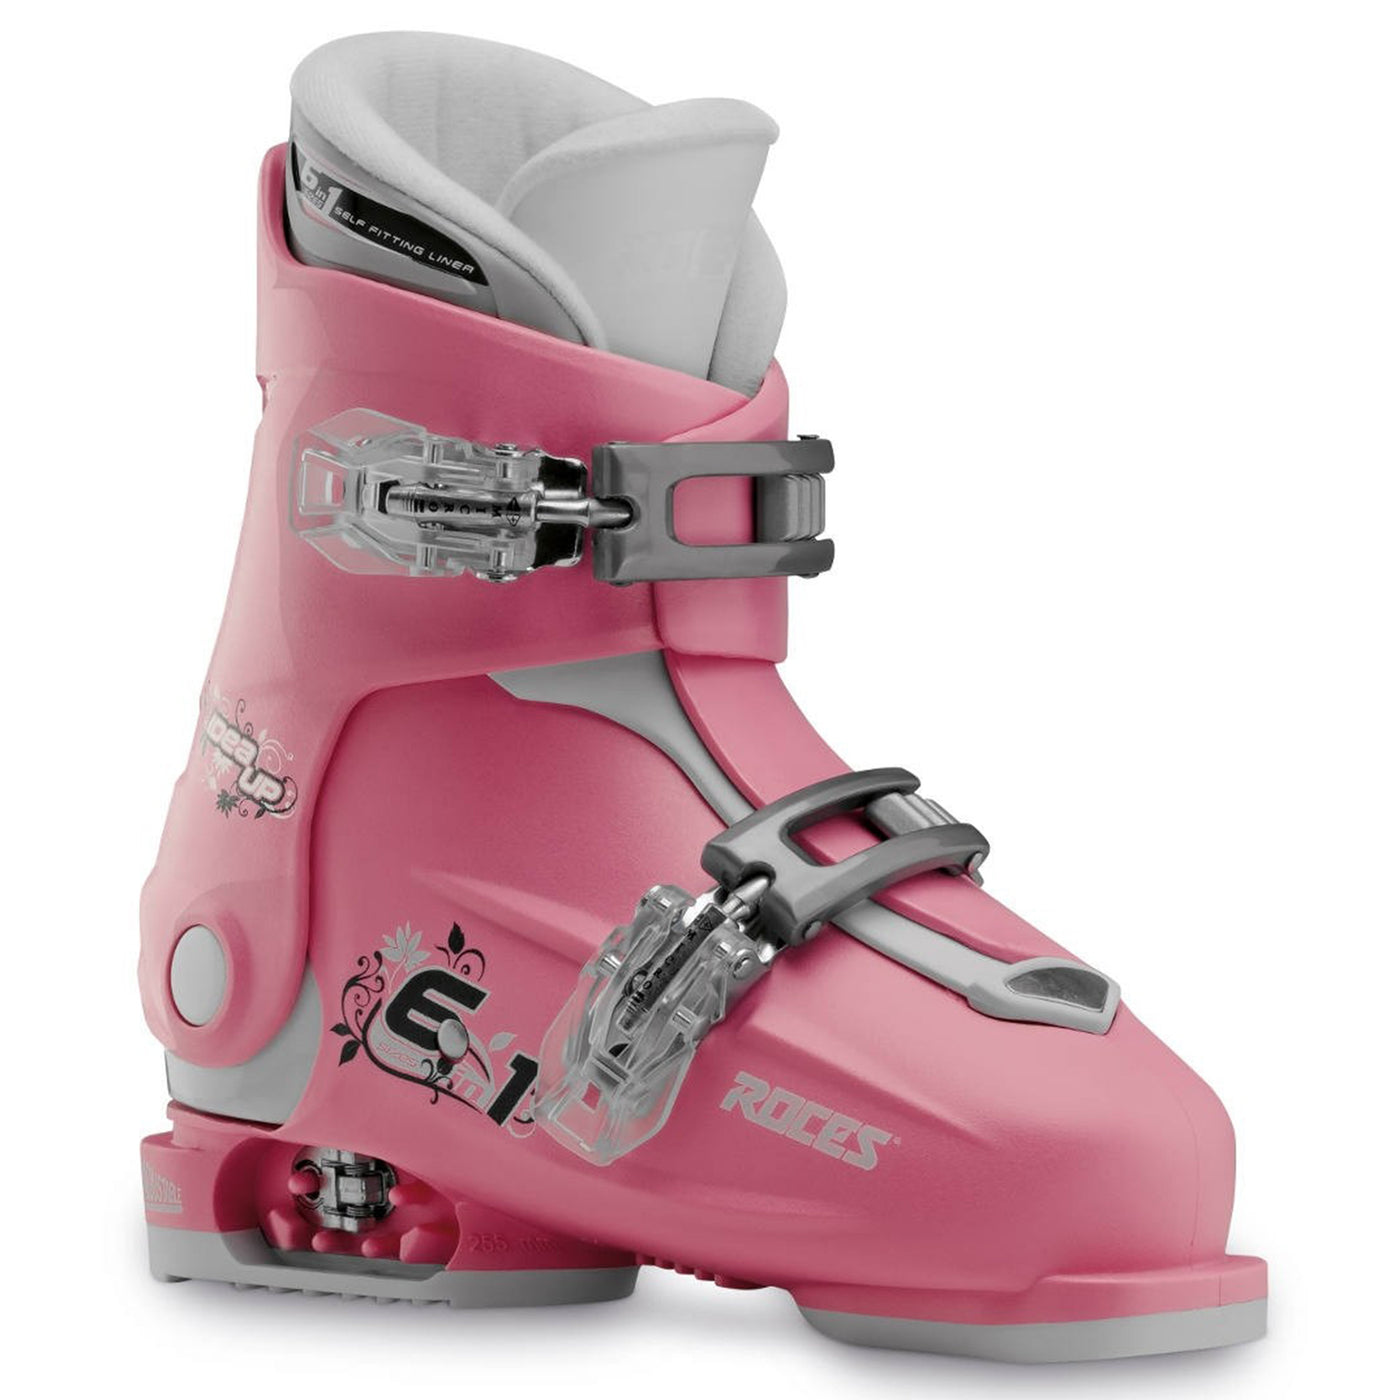 Roces IDEA Up Adjustable Youth Ski Boots | Size 19.0 - 22.0 MP - (OPEN BOX RETURN) SKI BOOTS Roces Deep Pink/White  